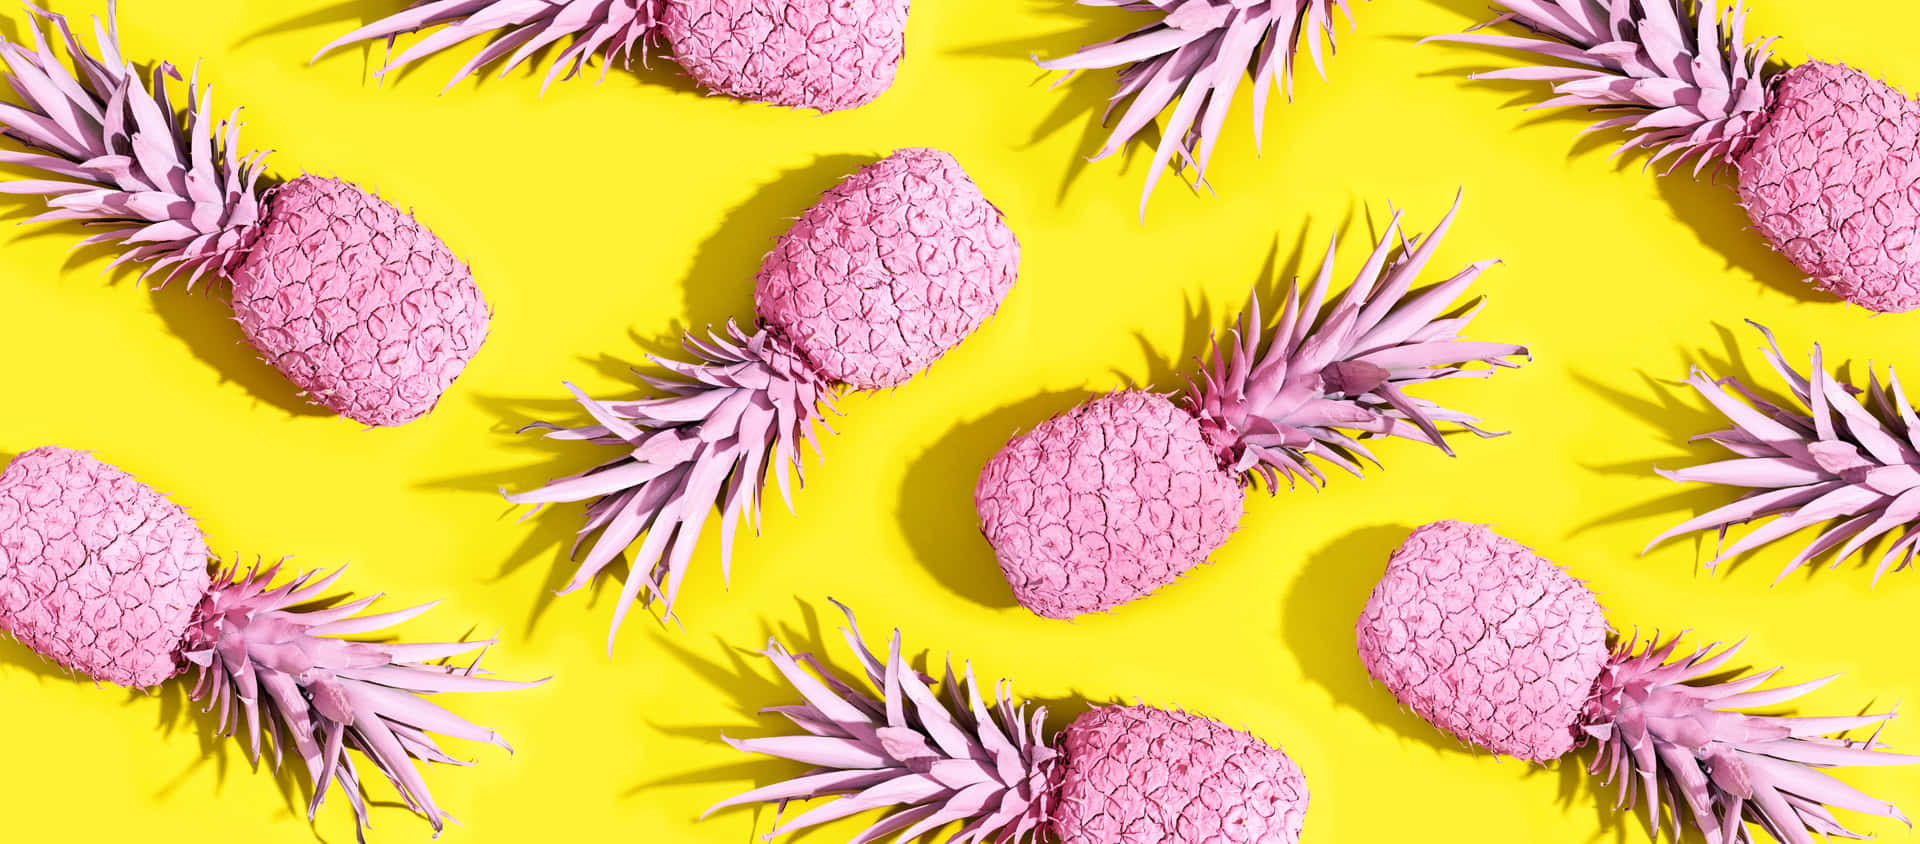 "A refreshing Pineapple Desktop to add a tropical flair to your workspace" Wallpaper